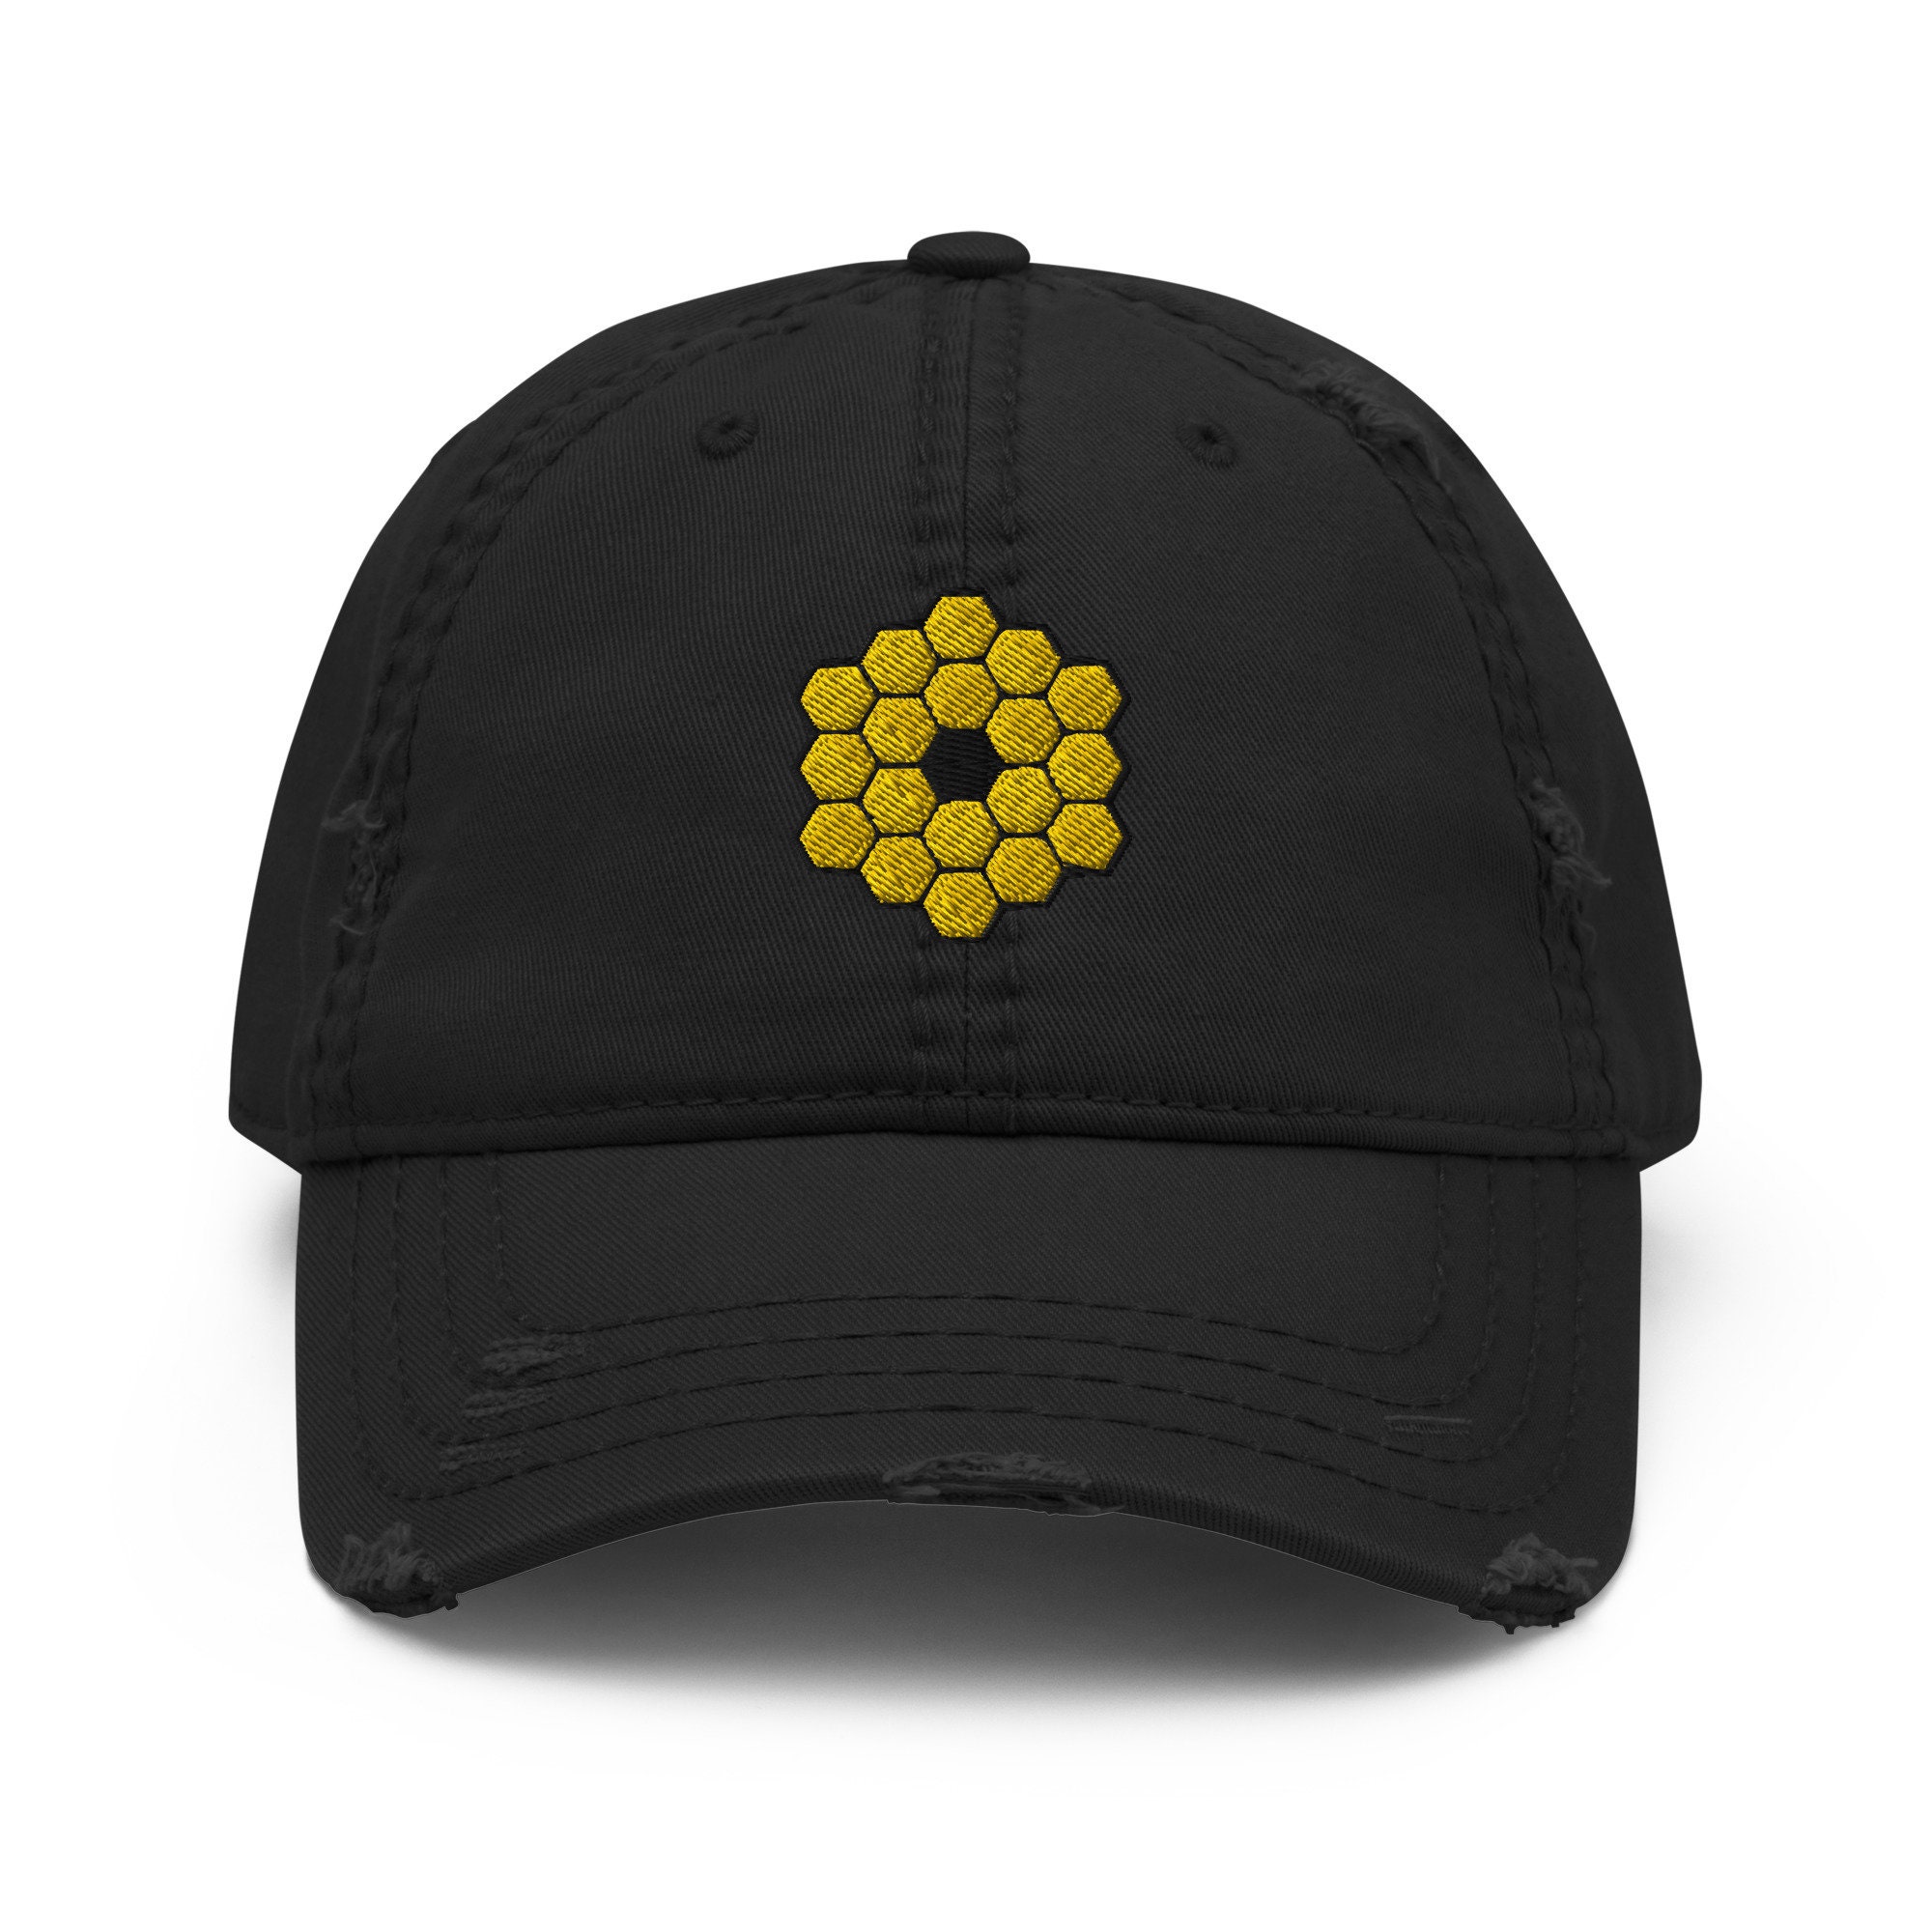 James Webb Space Telescope JWST Distressed Father's Day Embroidered Hat